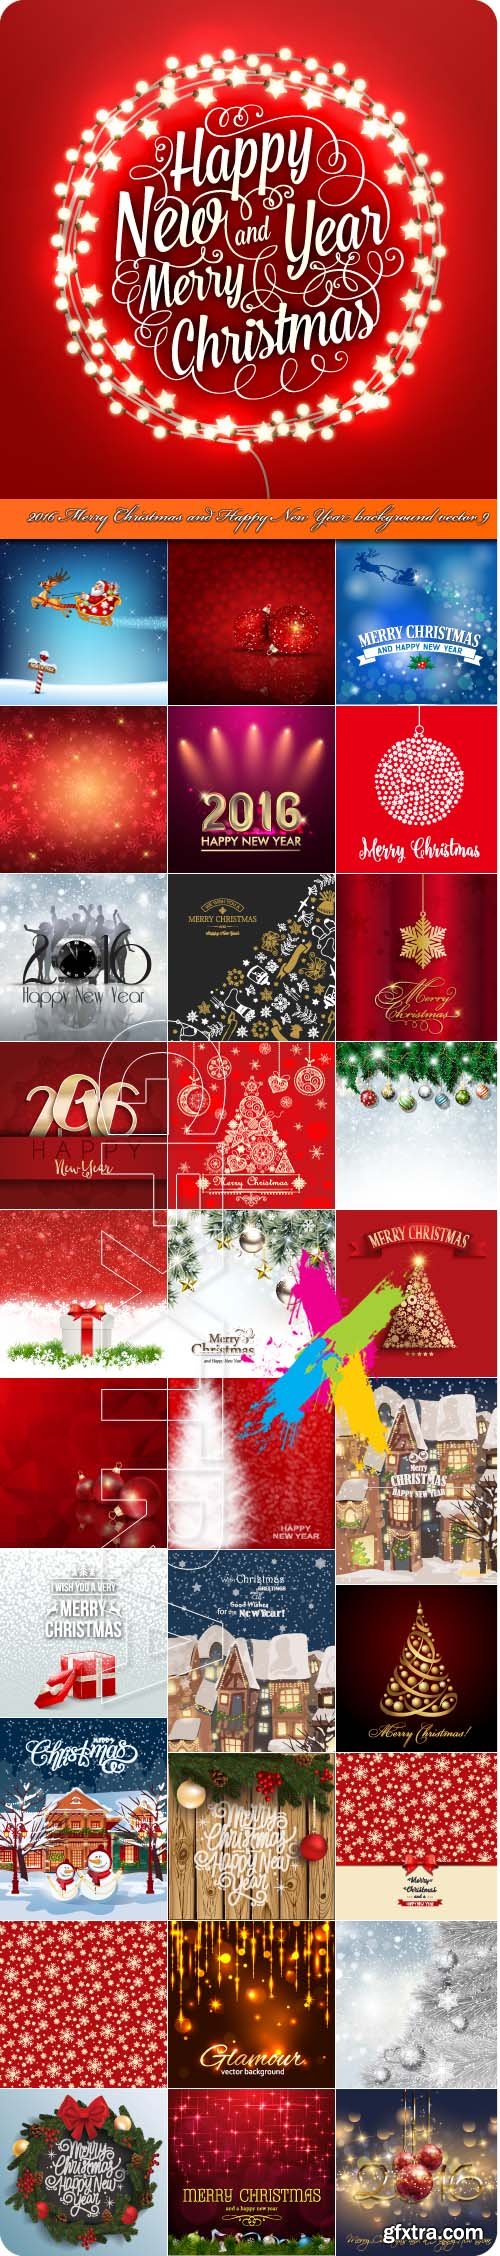 2016 Merry Christmas and Happy New Year background vector 9